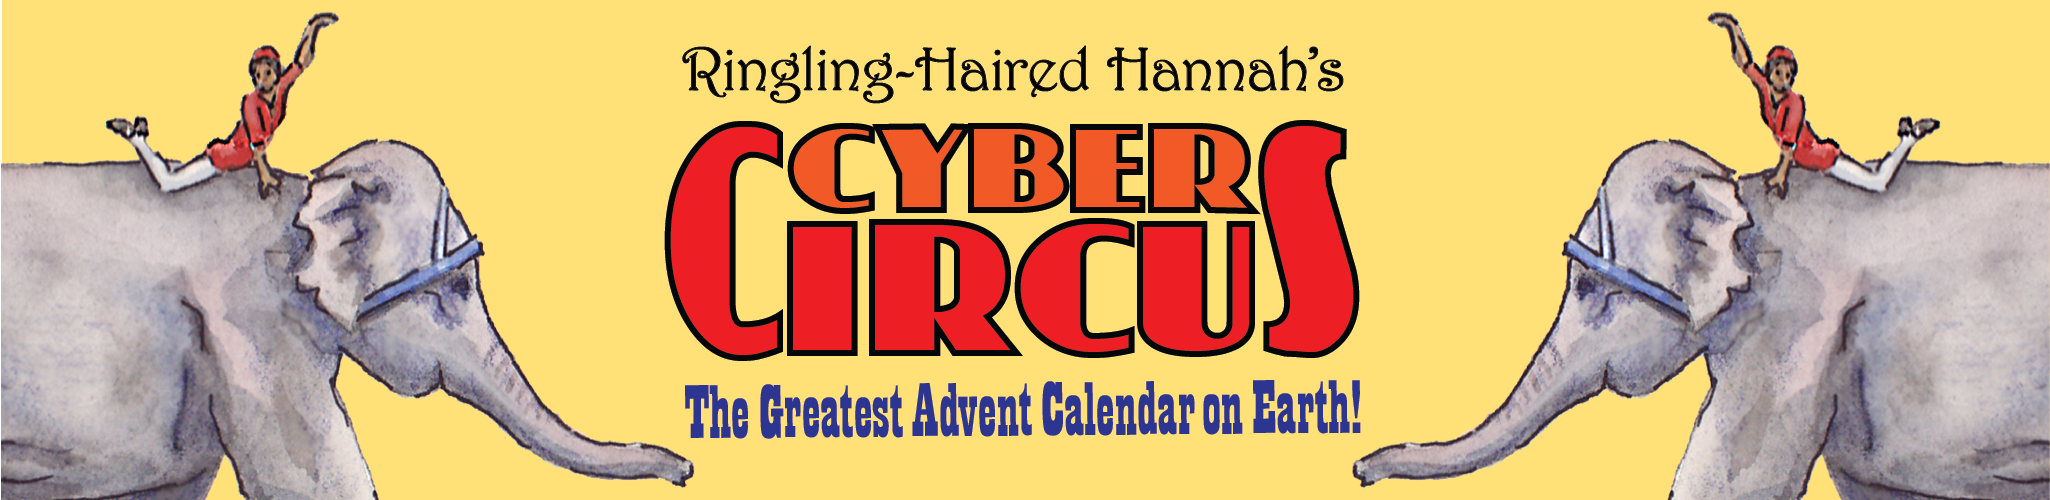 Ringling-Haired Hannah's Cyber Circus: The Greatest Advent Calendar on Earth!